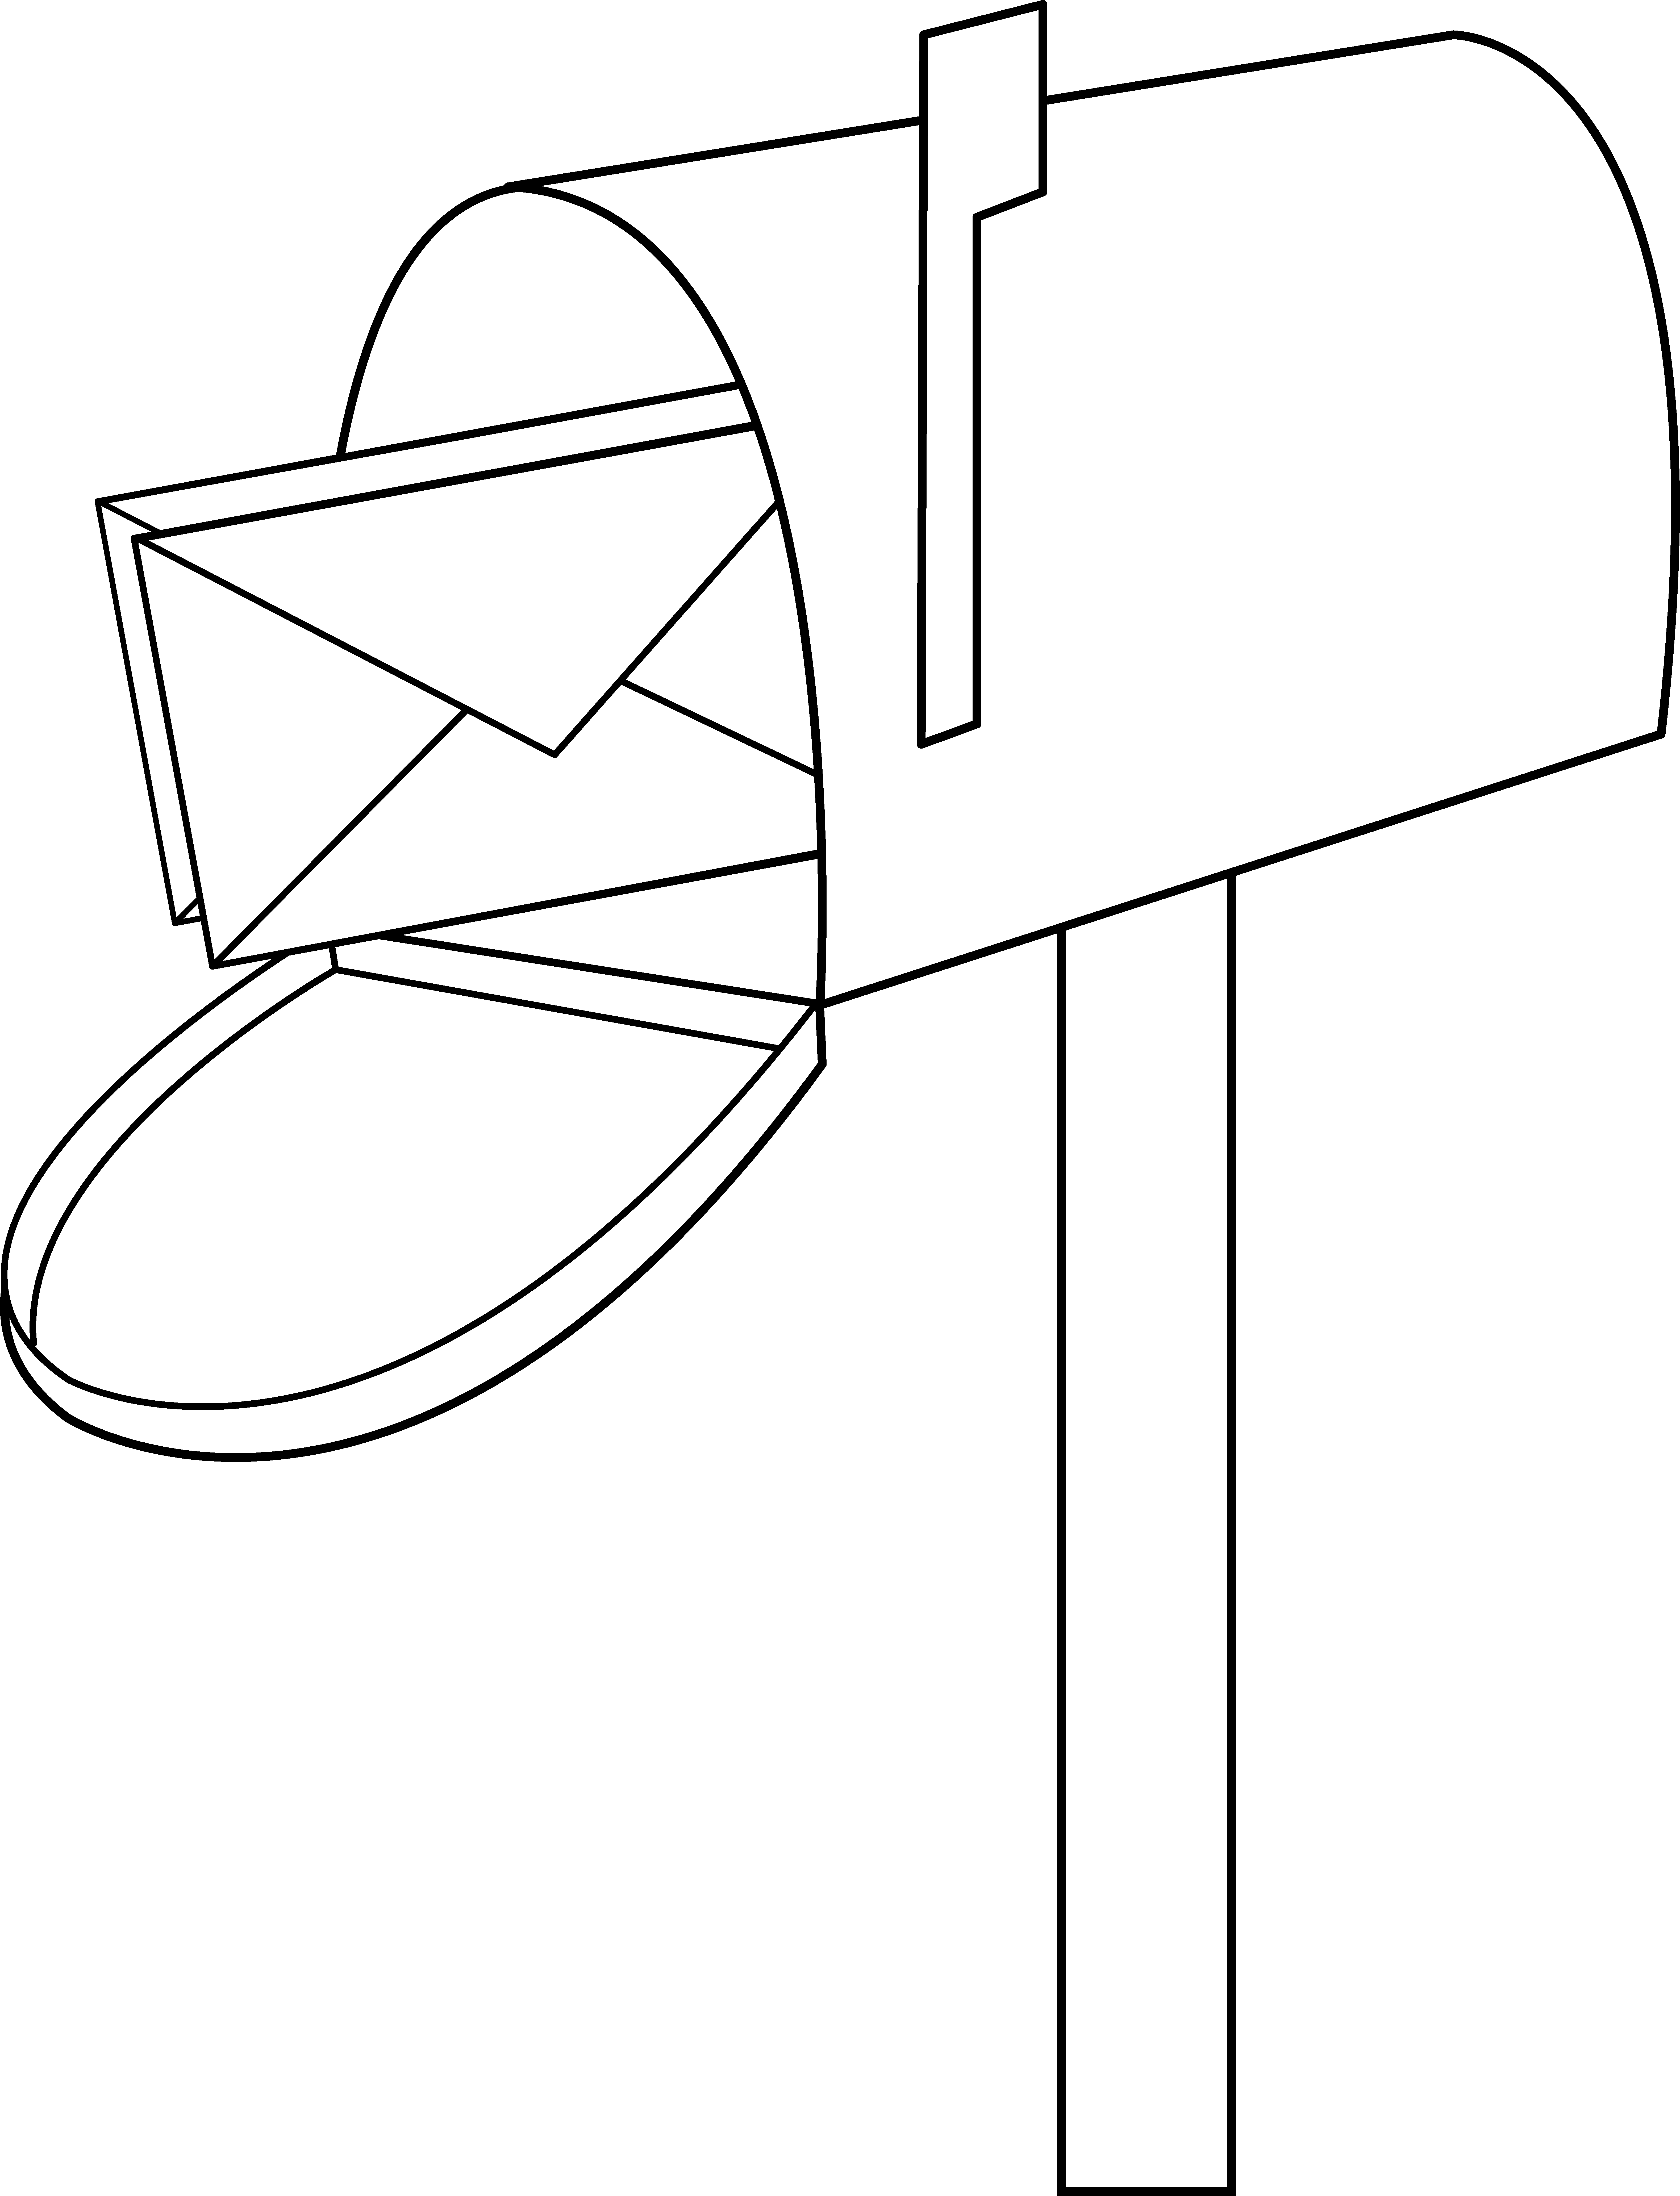 Mailbox 8 pics of mail cartoon coloring page mail clip art black | Coloring  books, Coloring pages, Cartoon coloring pages